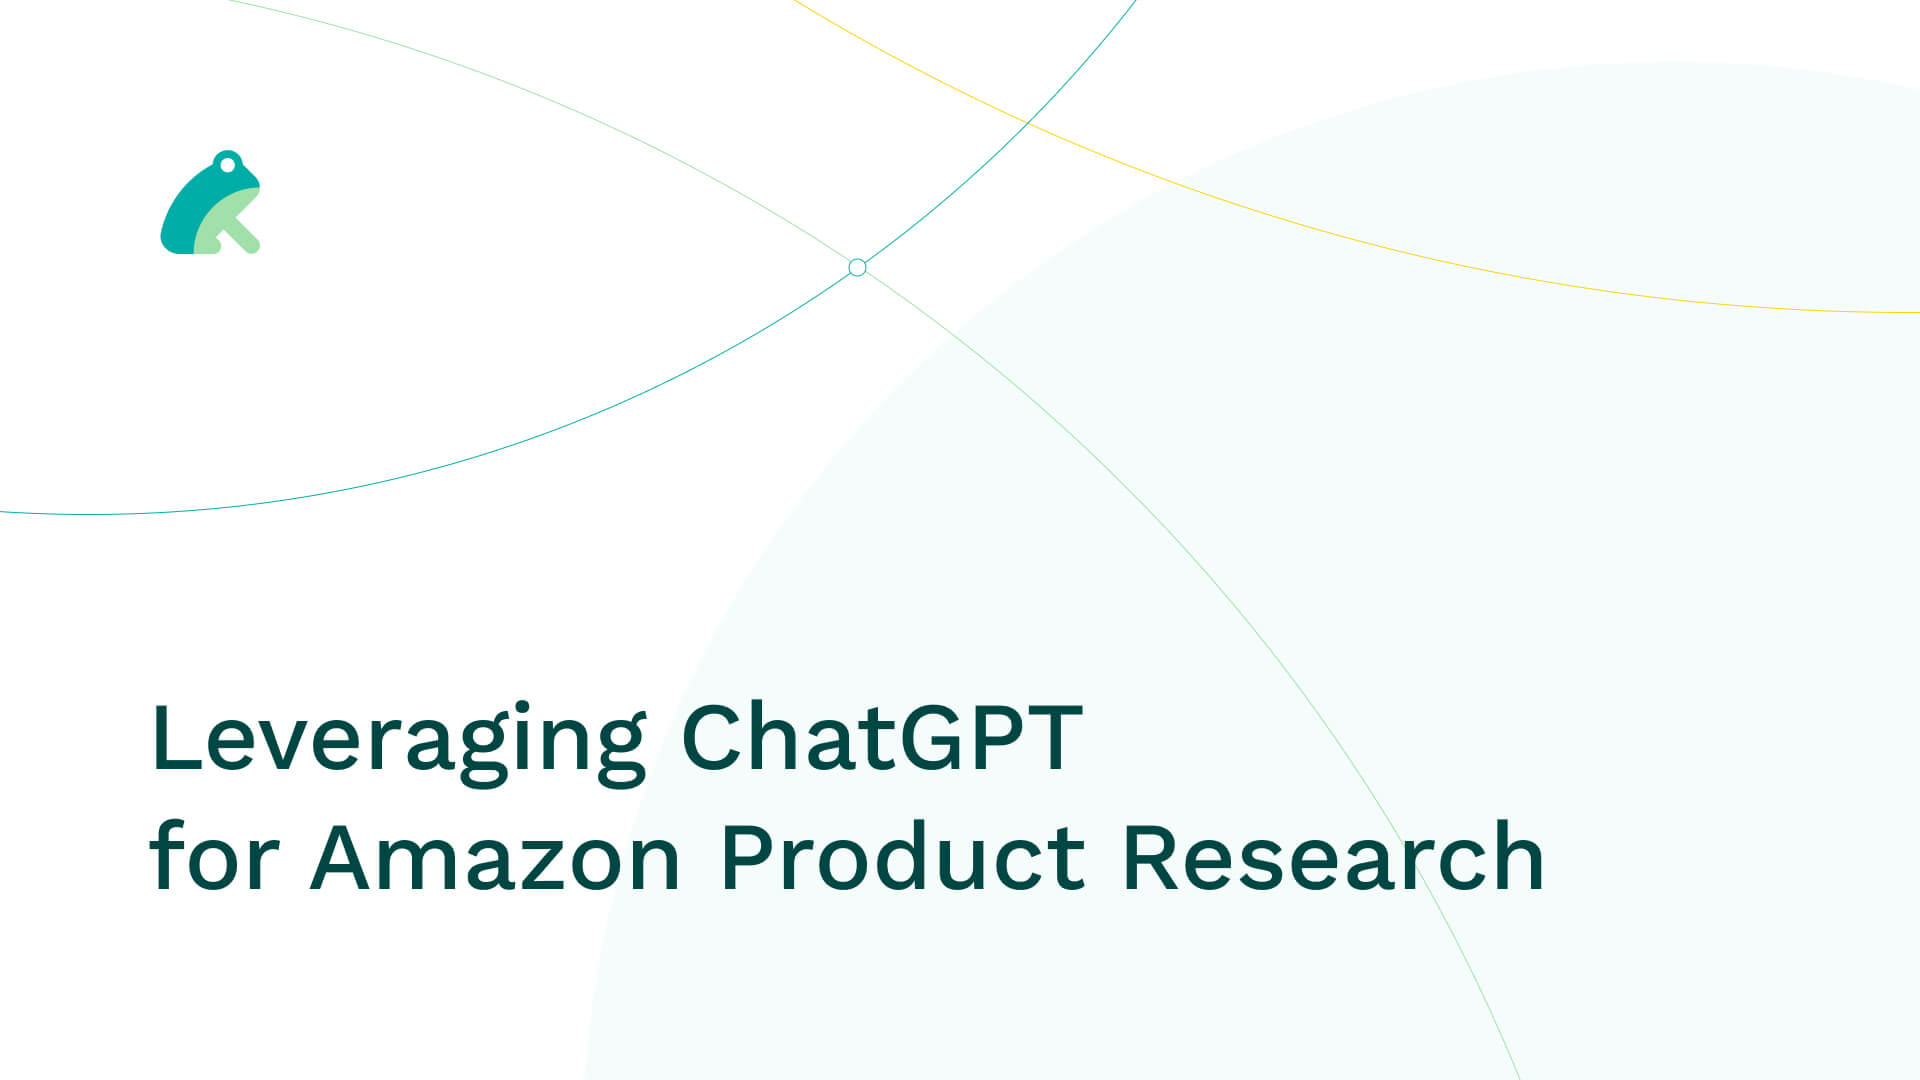 Leveraging ChatGPT for Amazon Product Research